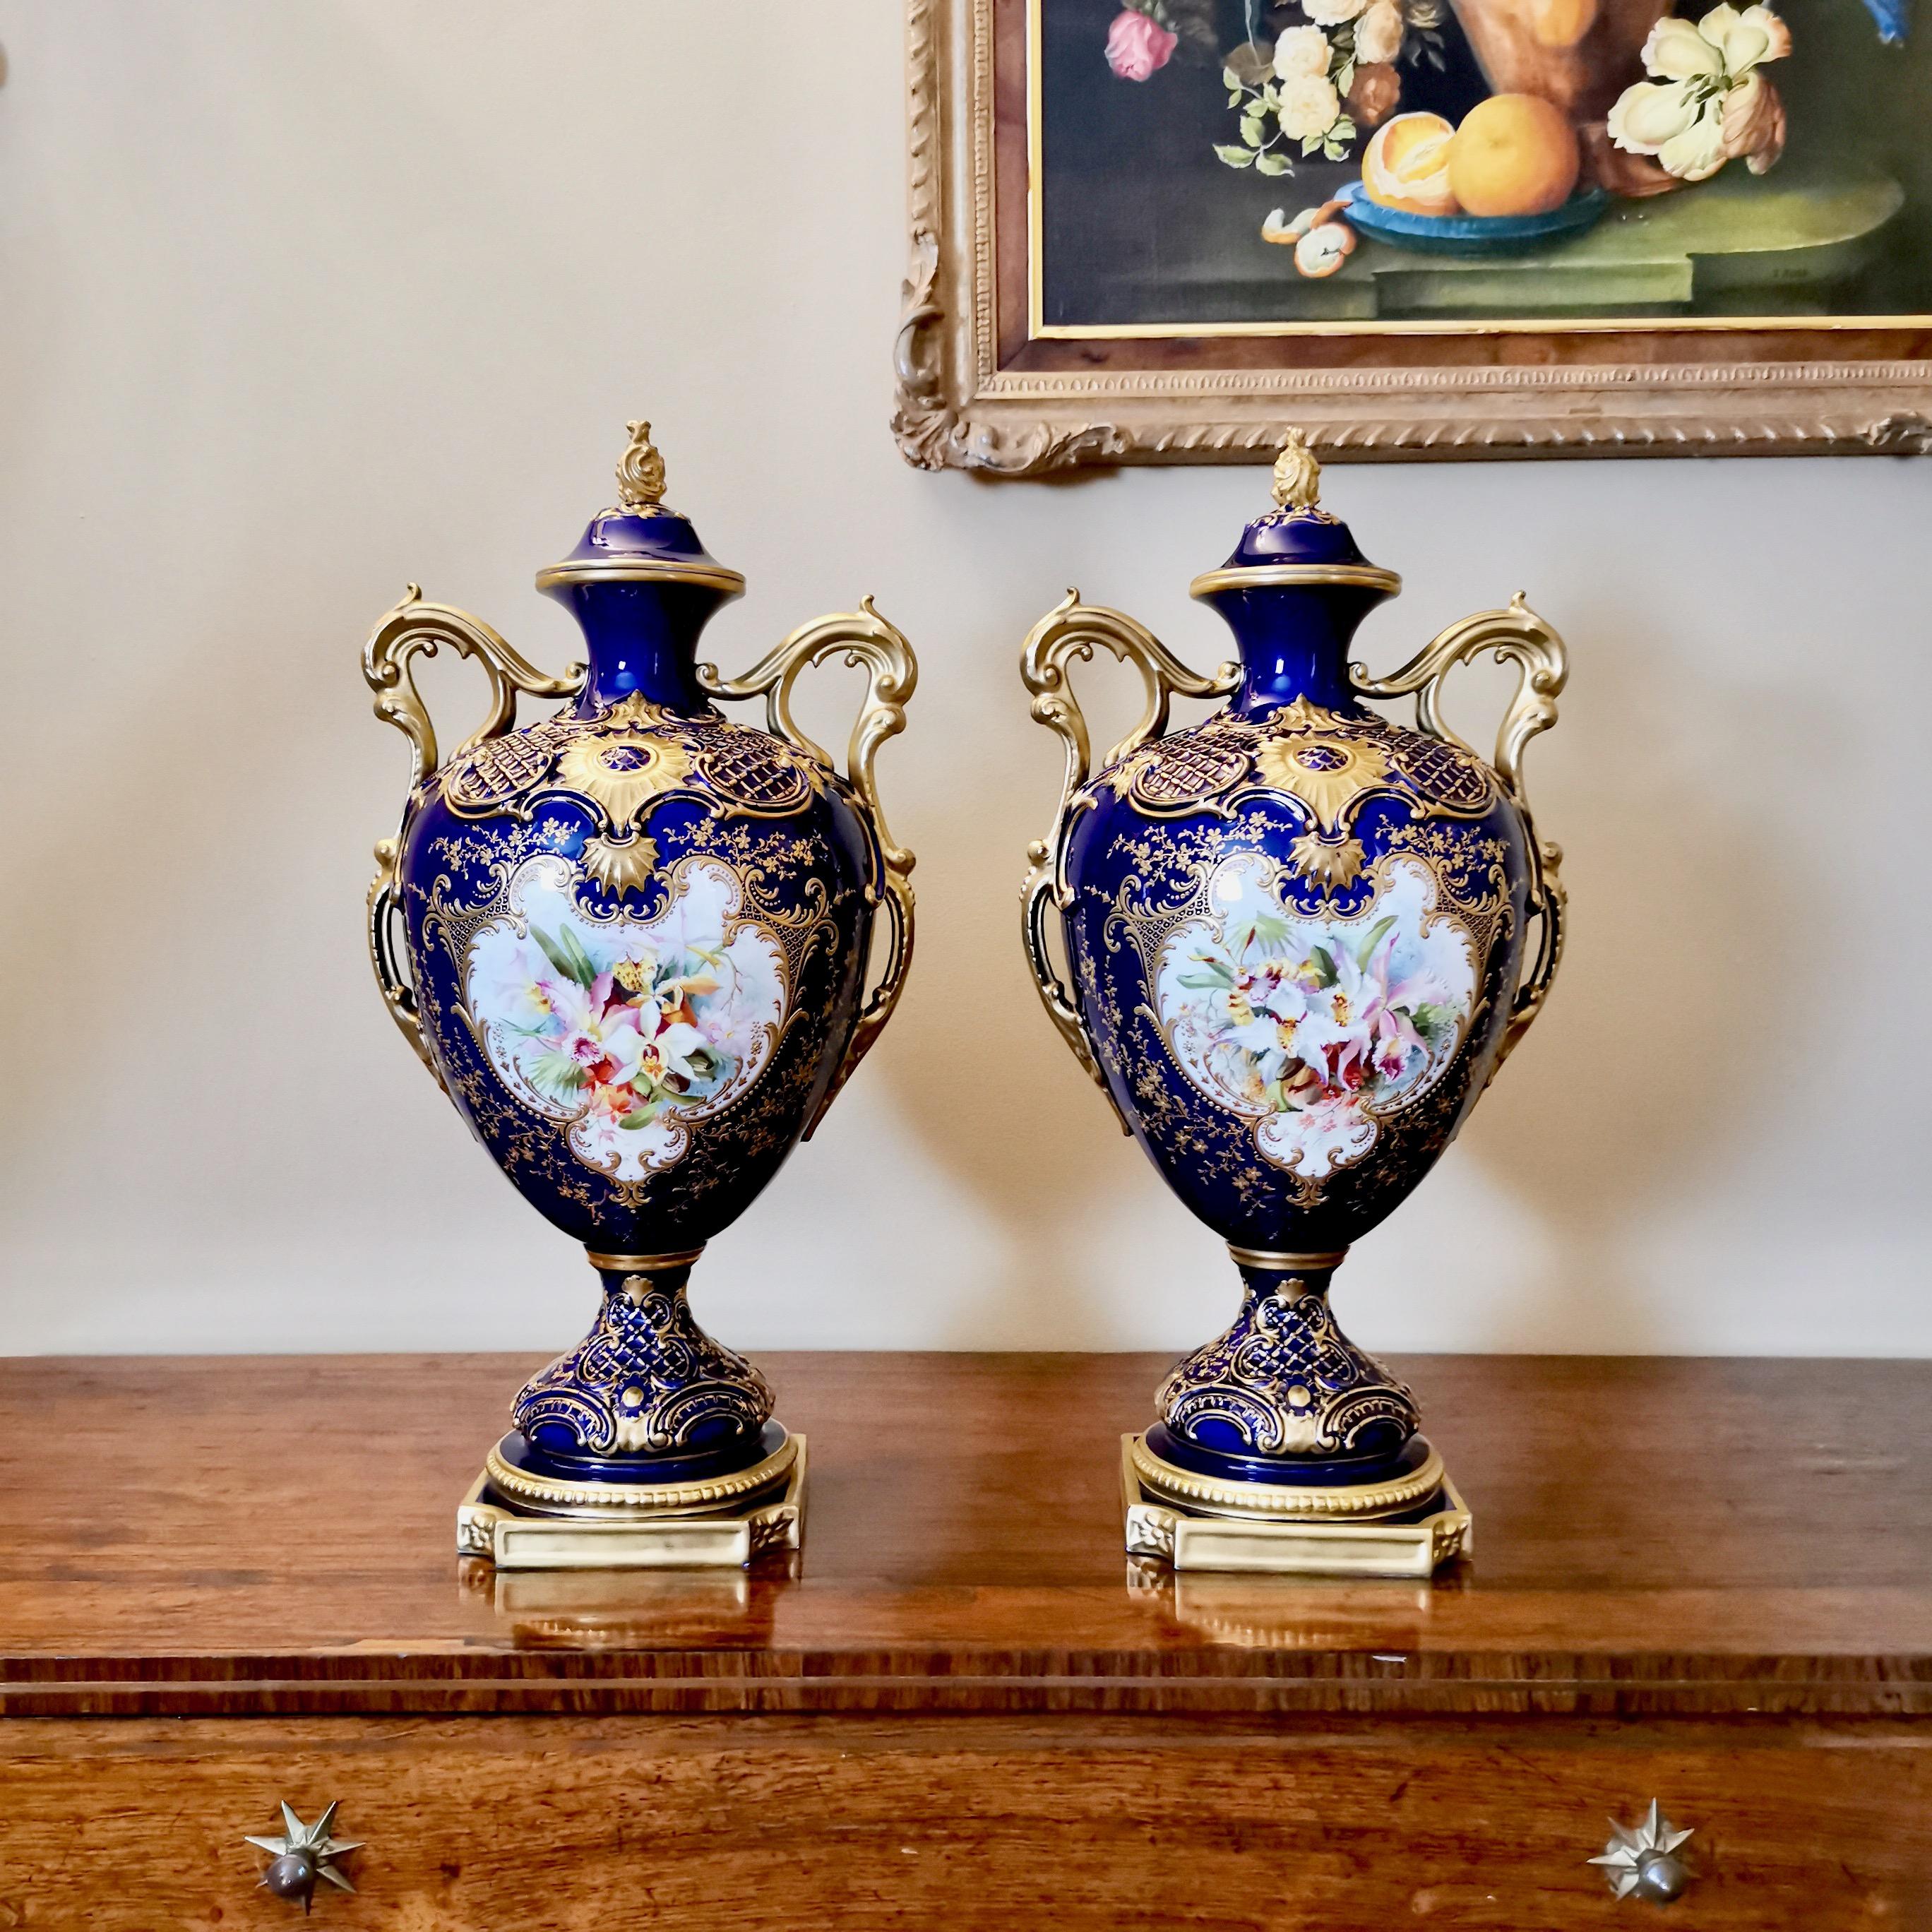 This is a very fine set of two tall lidded vases made by Royal Worcester in 1901. The vases are in the cobalt or mazarine blue and raised gilt style with stunning orchid paintings signed by the famous painter Frank Roberts. 

Worcester was one of